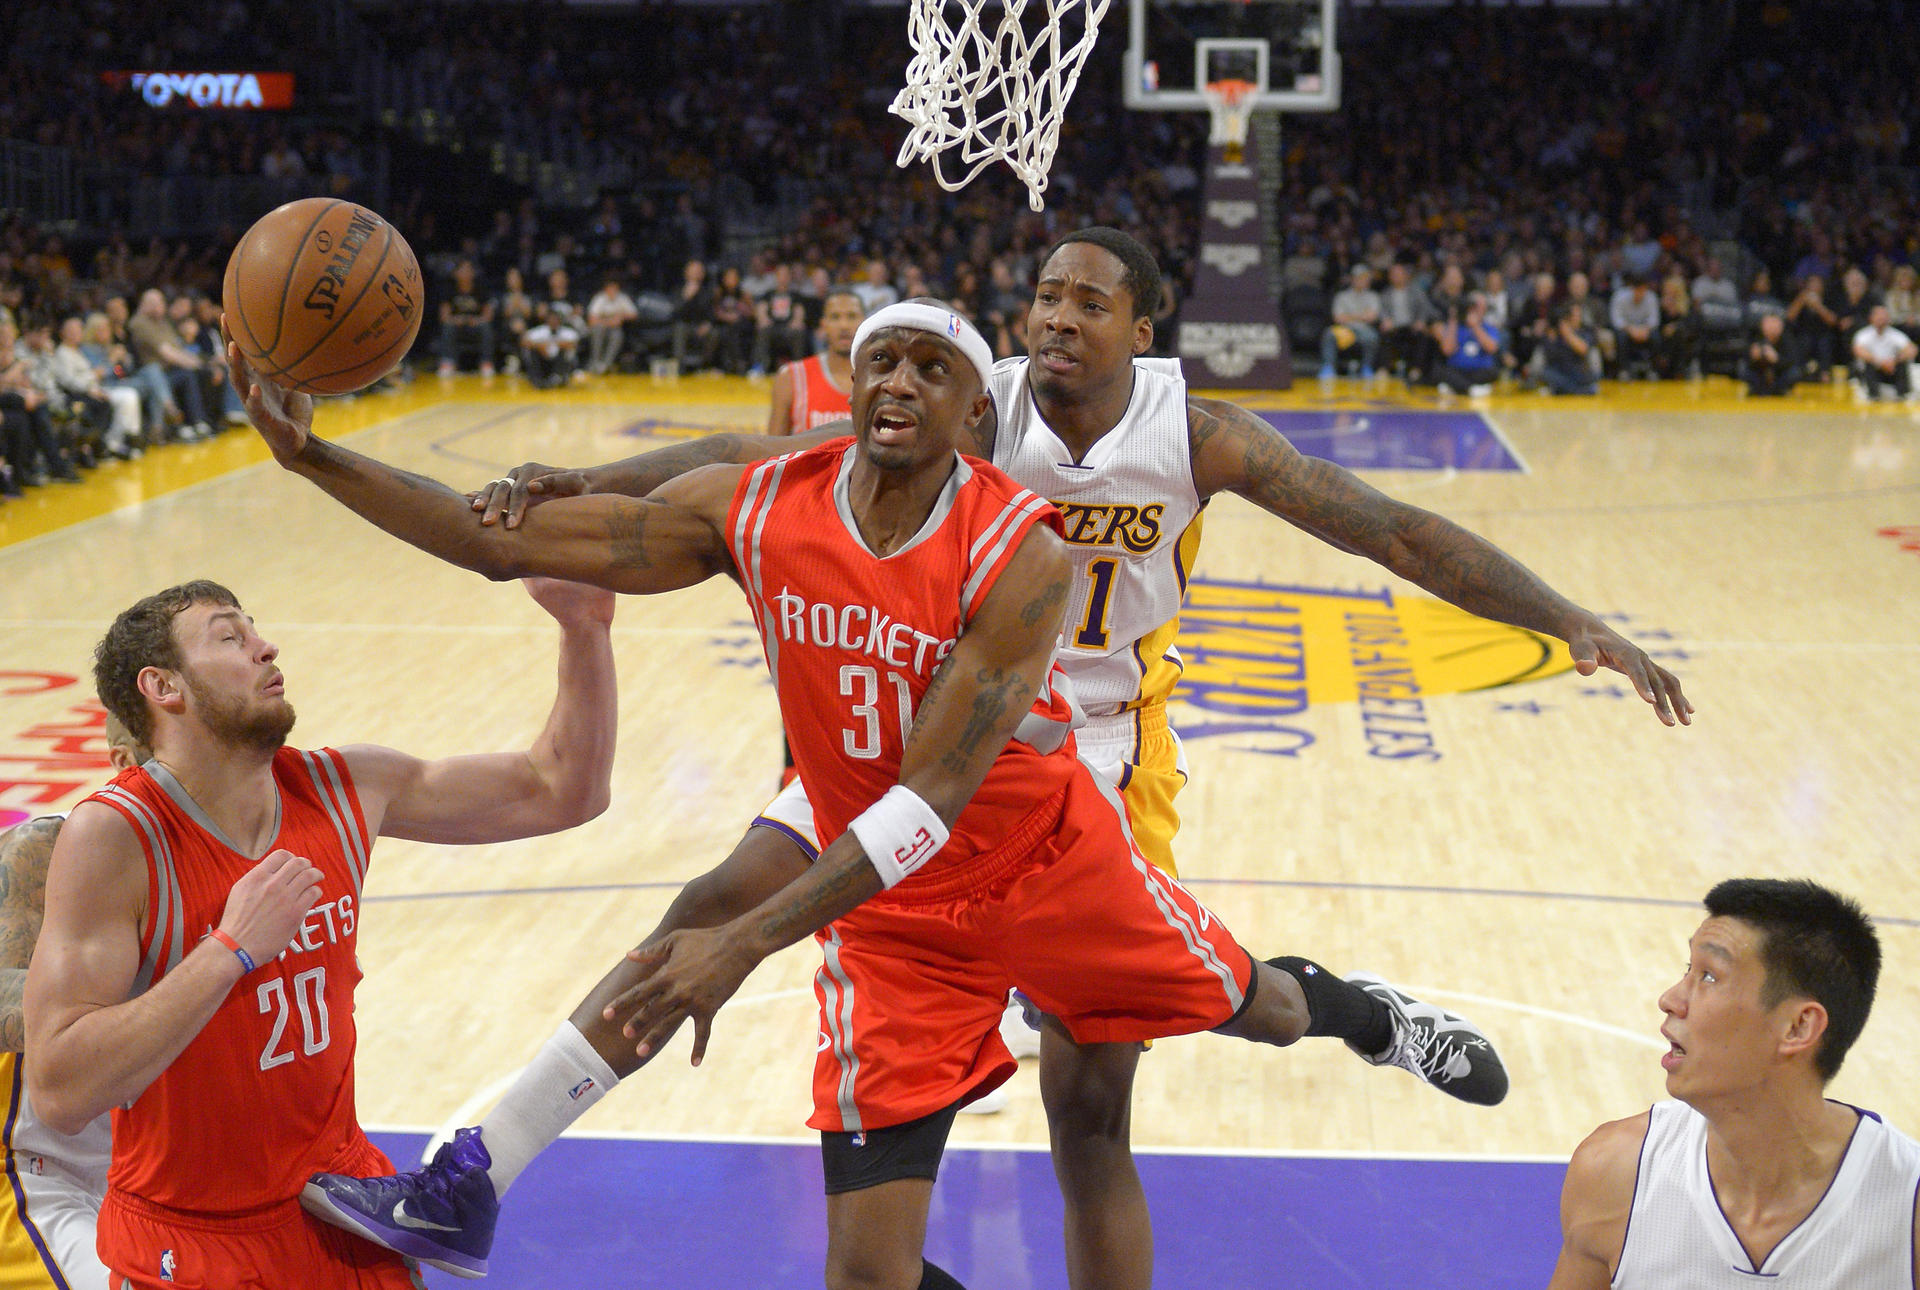 Houston Rockets guard Jason Terry is fouled by Lakers' Ed Davis, with Donatas Motiejunas (left) and Jeremy Lin looking on. Photo: AP